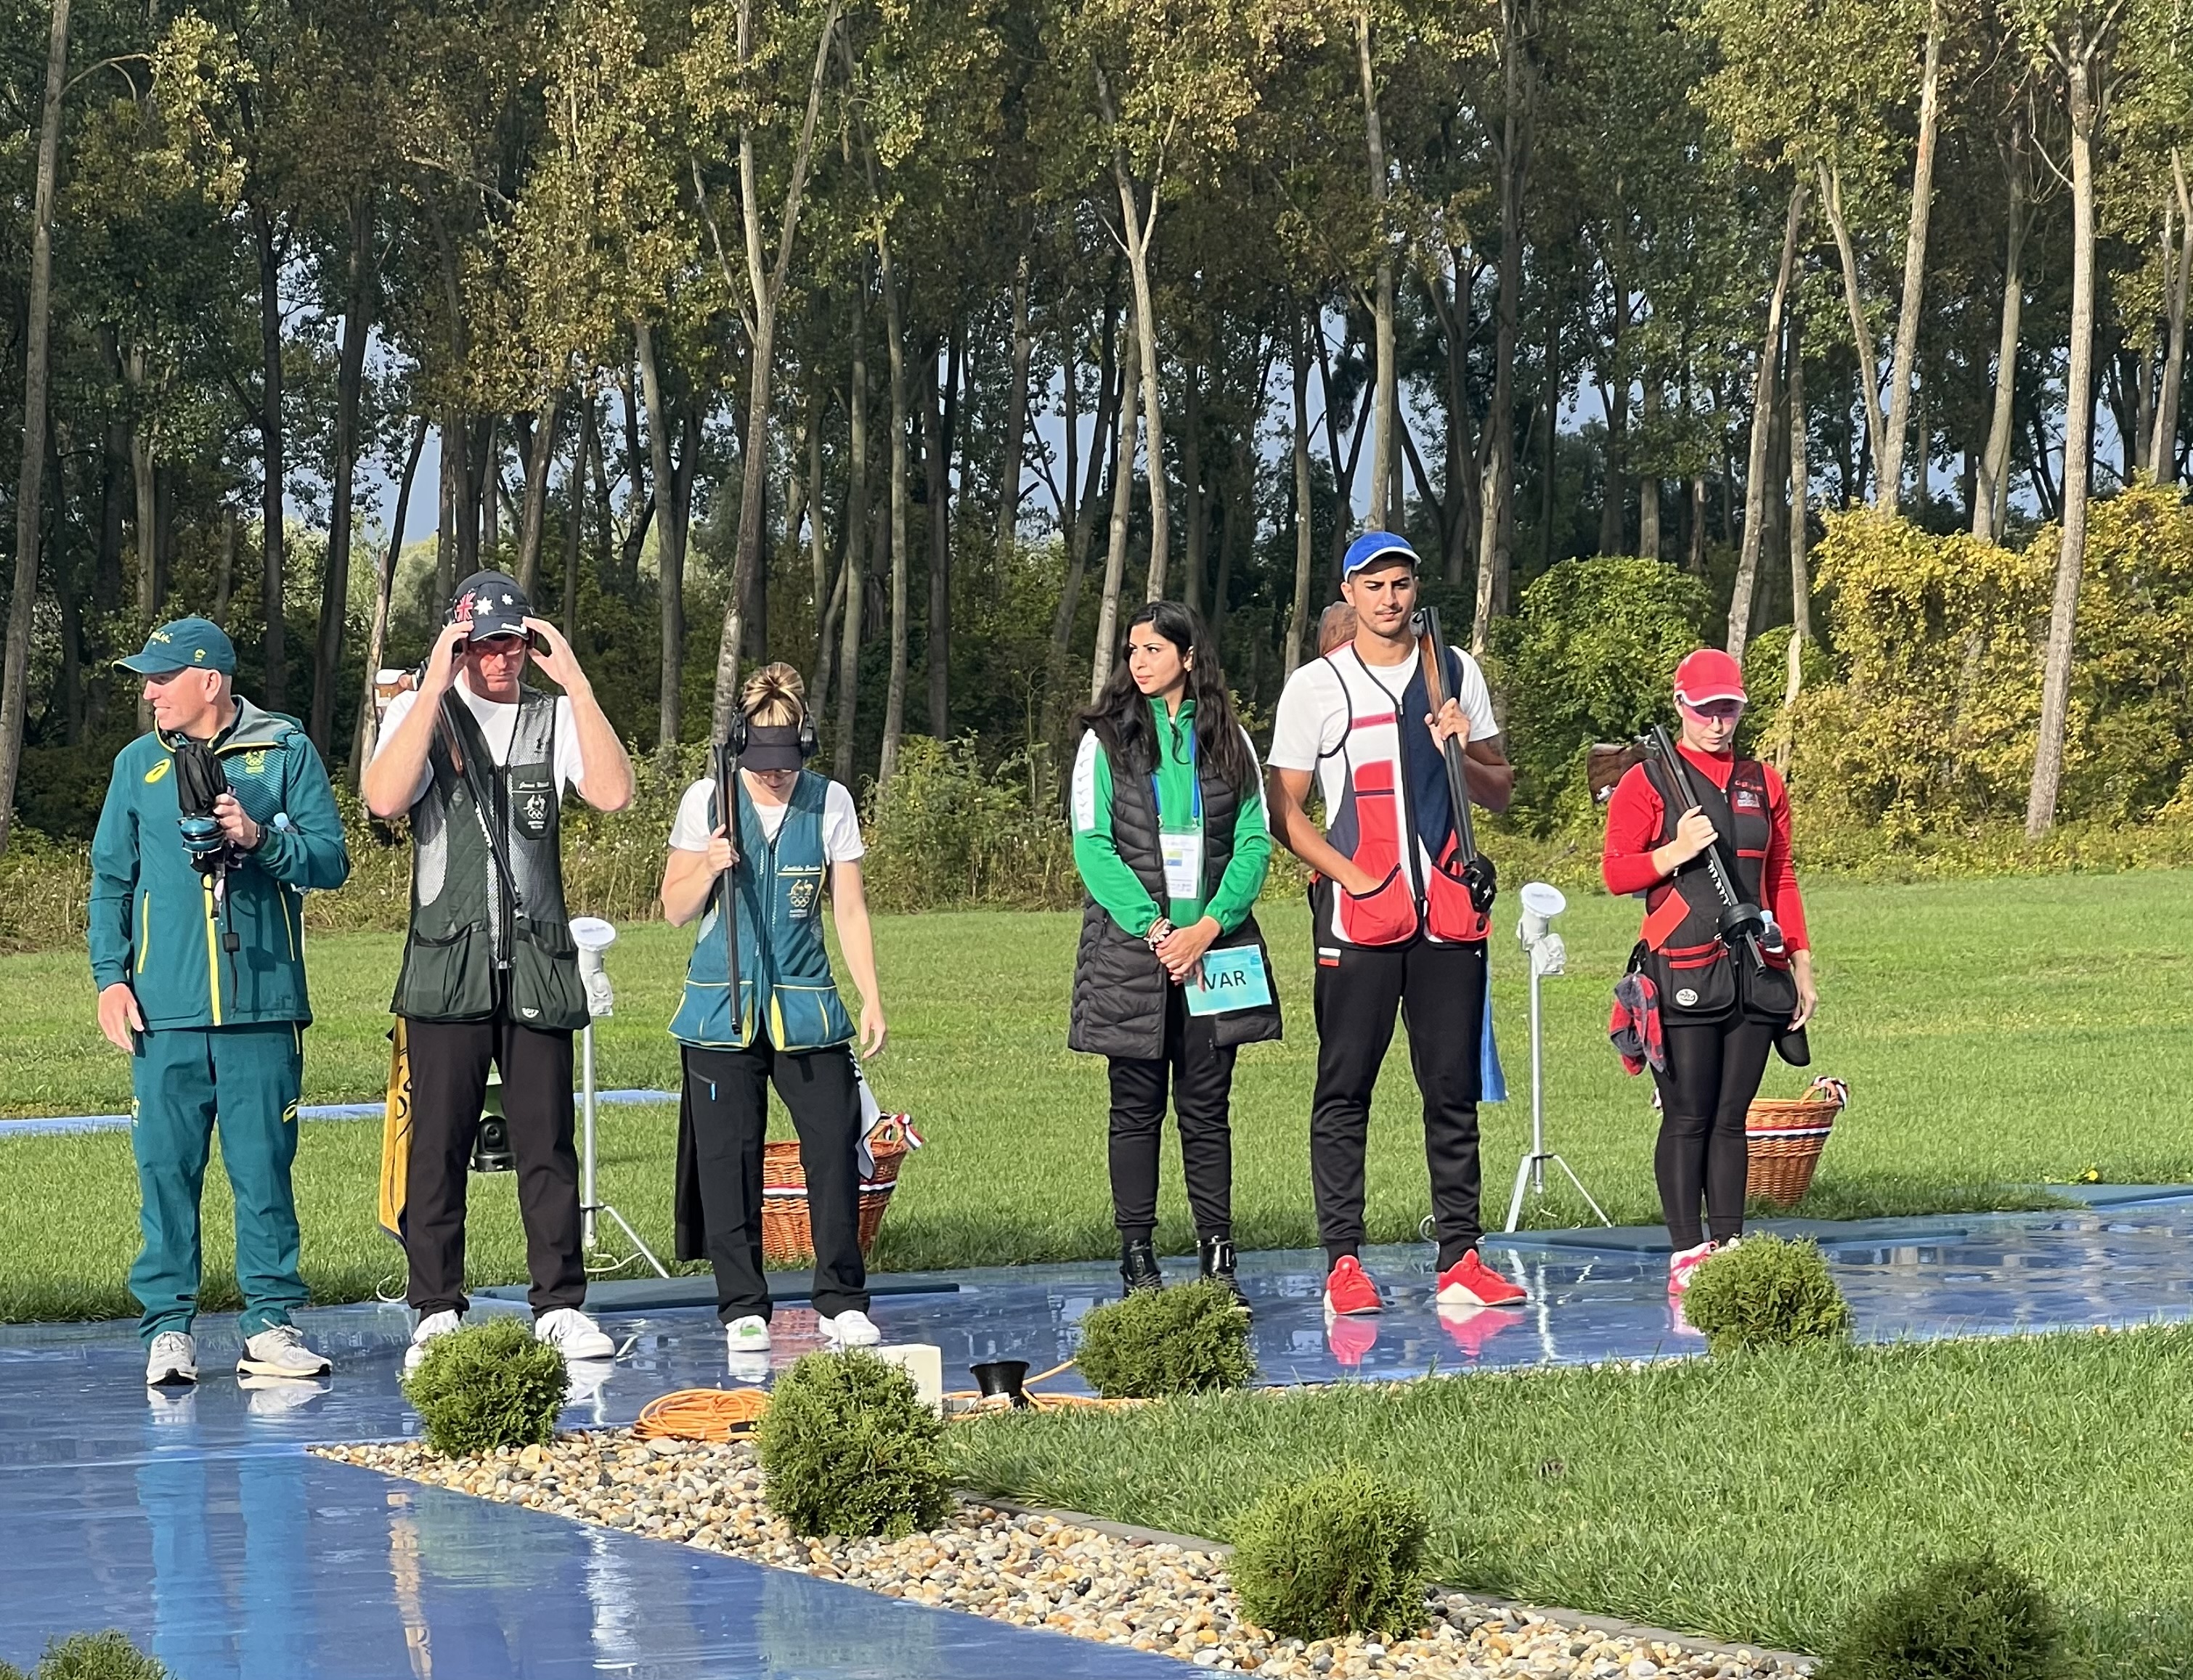 Spectacular success at the 2022 World Shooting Championship in Croatia